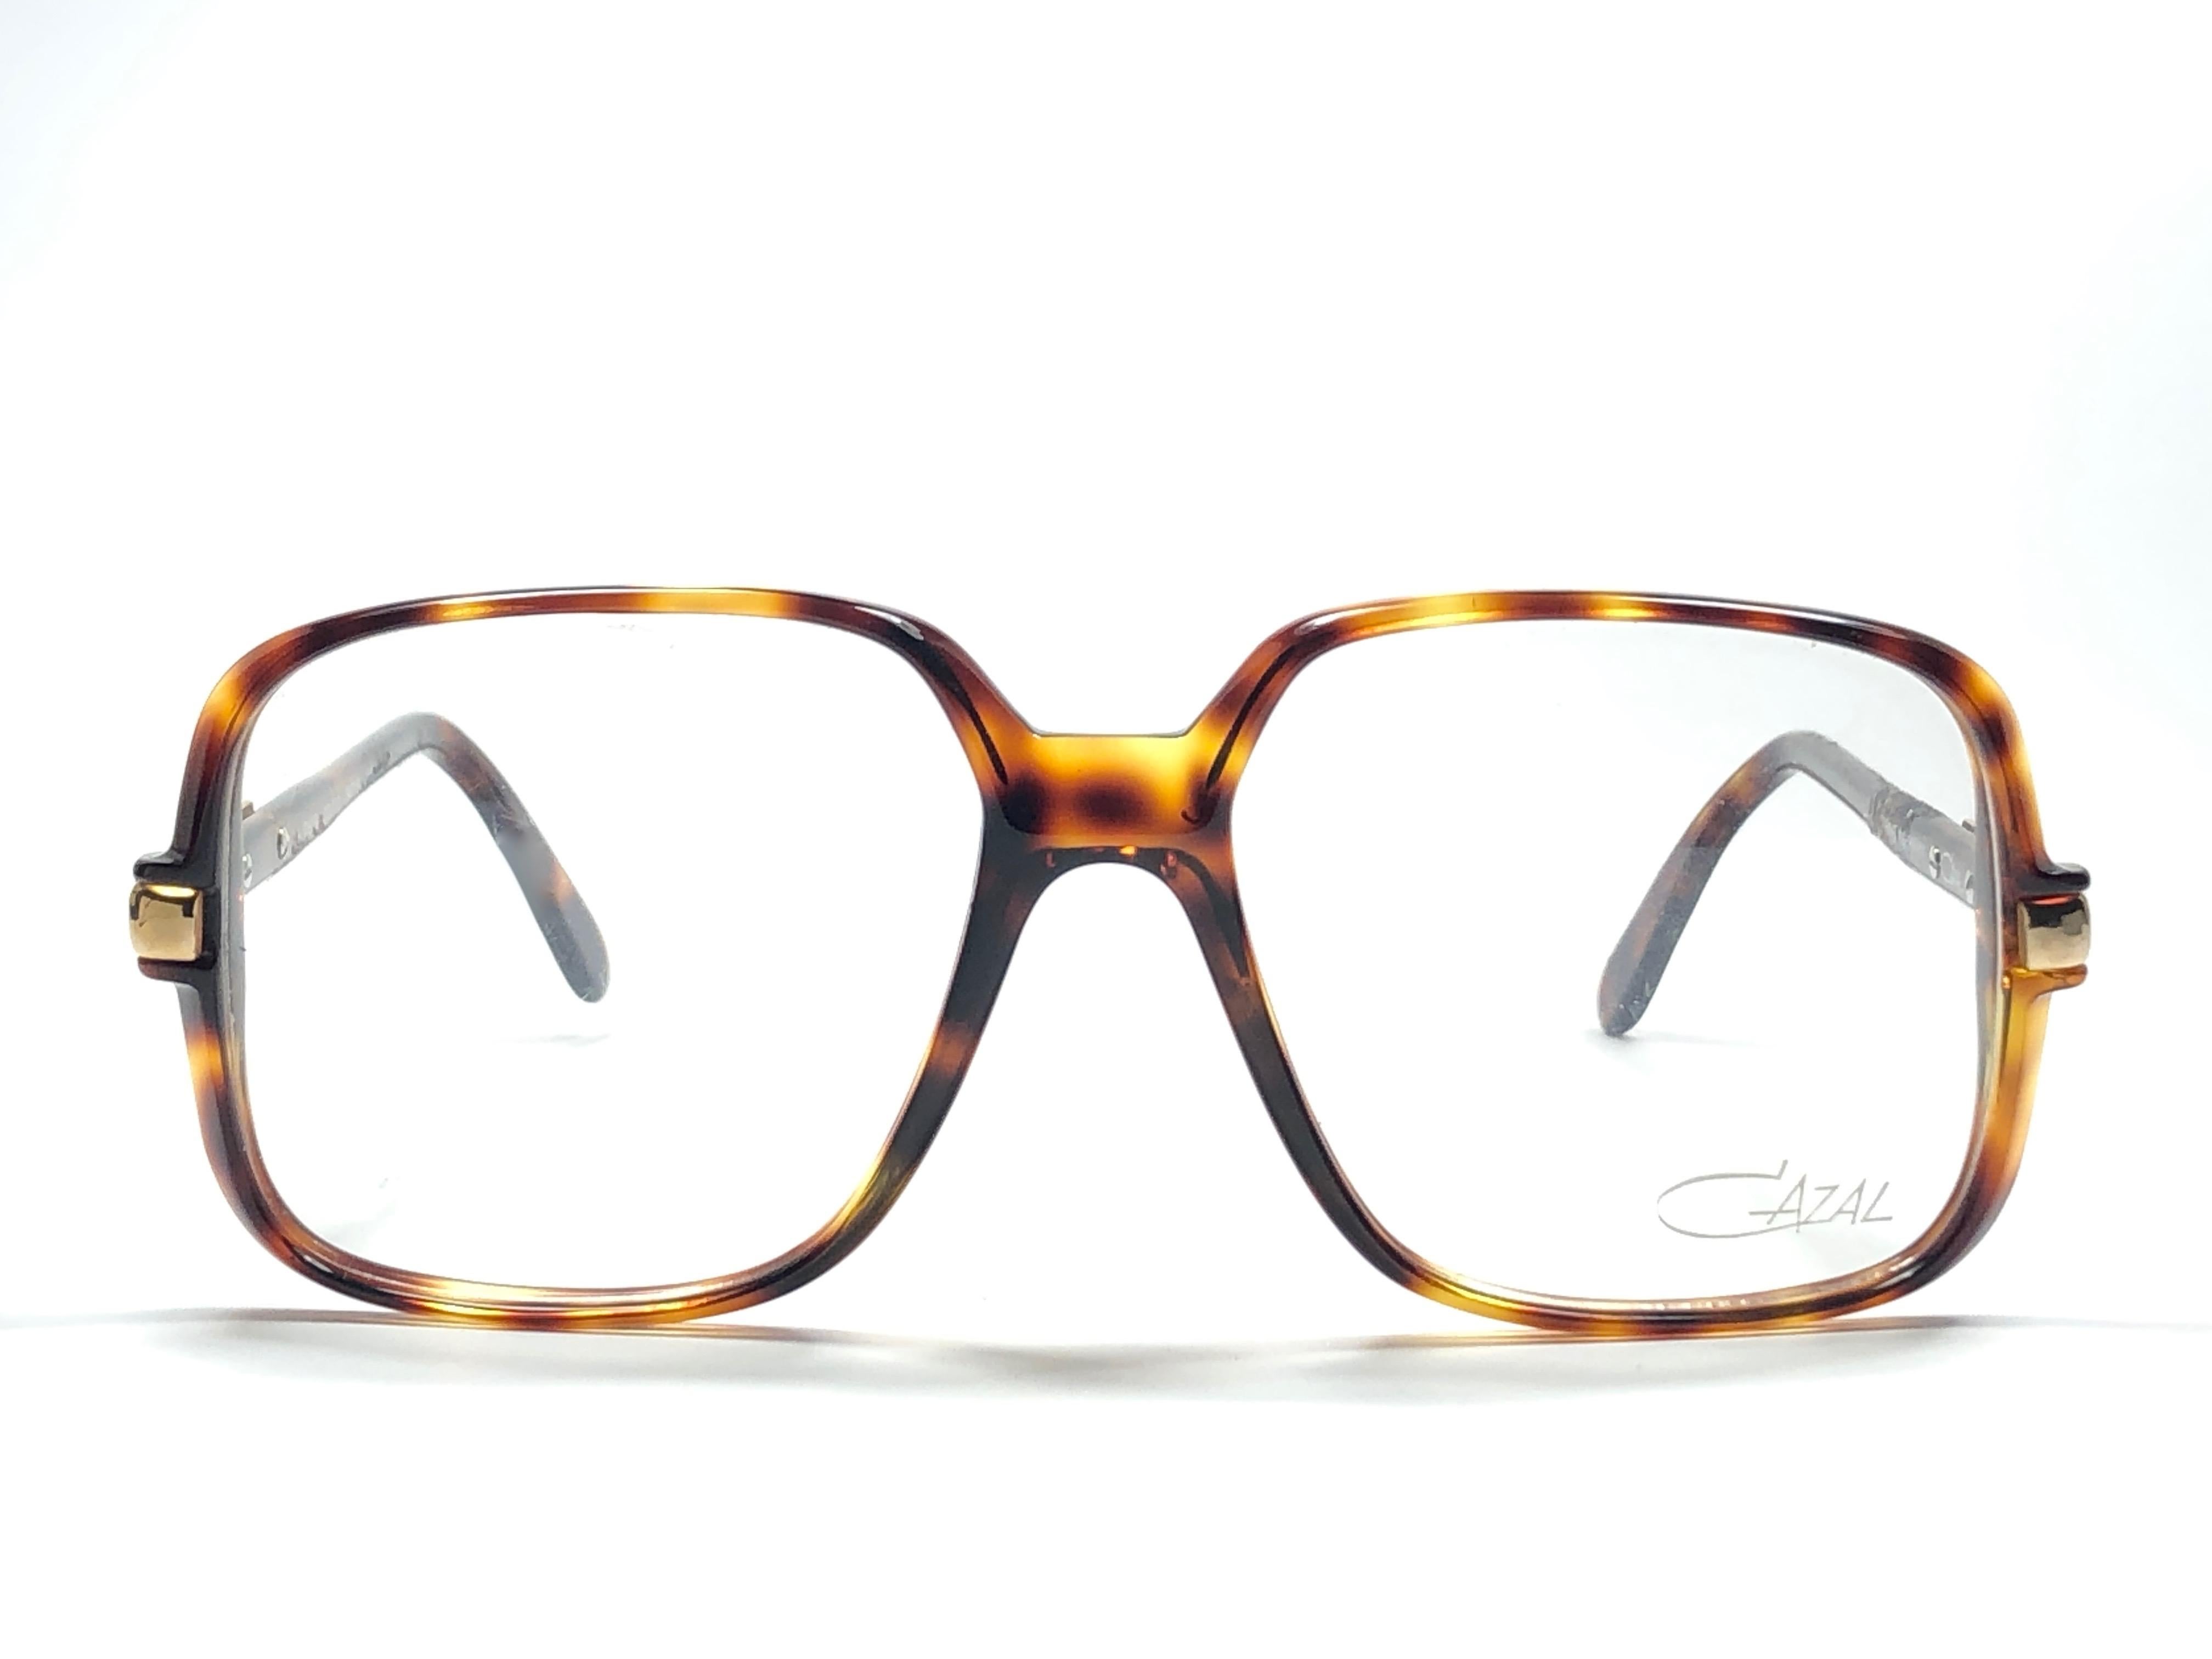 New Vintage Cazal 639 Tortoise with gold details frame. Perfect for reading spectacles. 

Comes with its original Cazal case. This item may show minor sign of wear due to storage.

Made in West Germany.